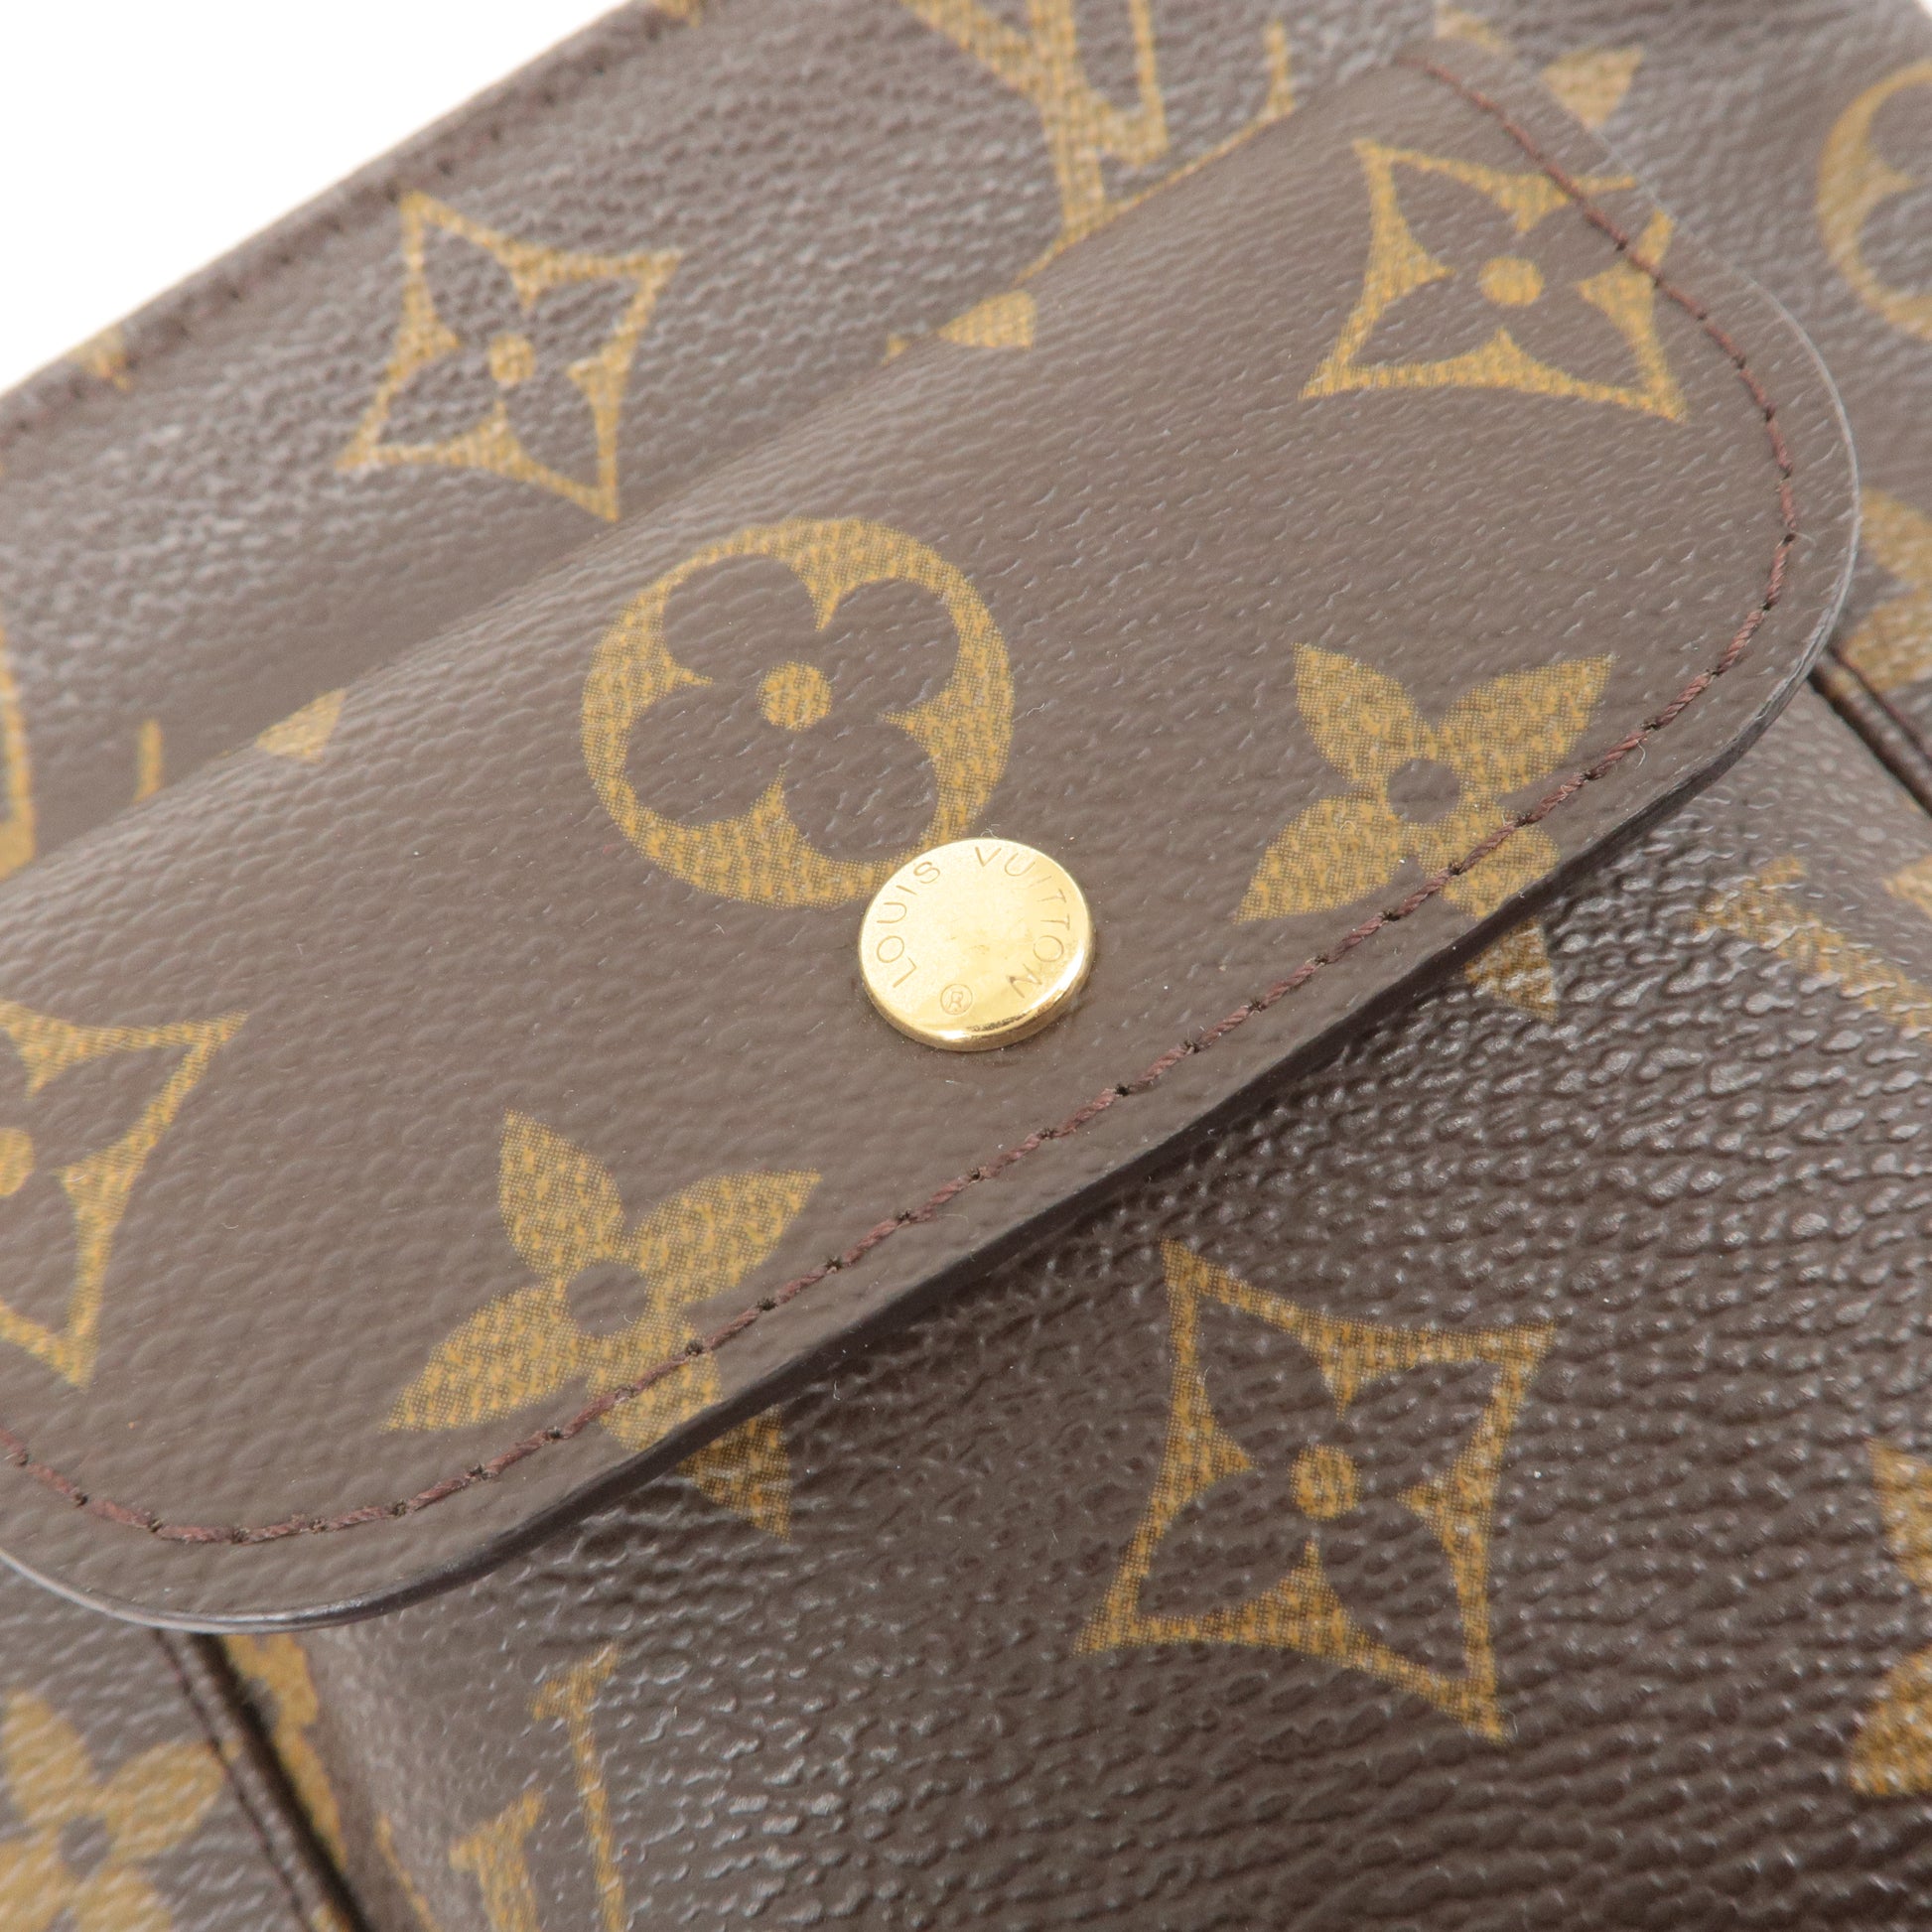 Louis Vuitton 2008 pre-owned Monogram Perforated Musette Shoulder Bag -  Farfetch